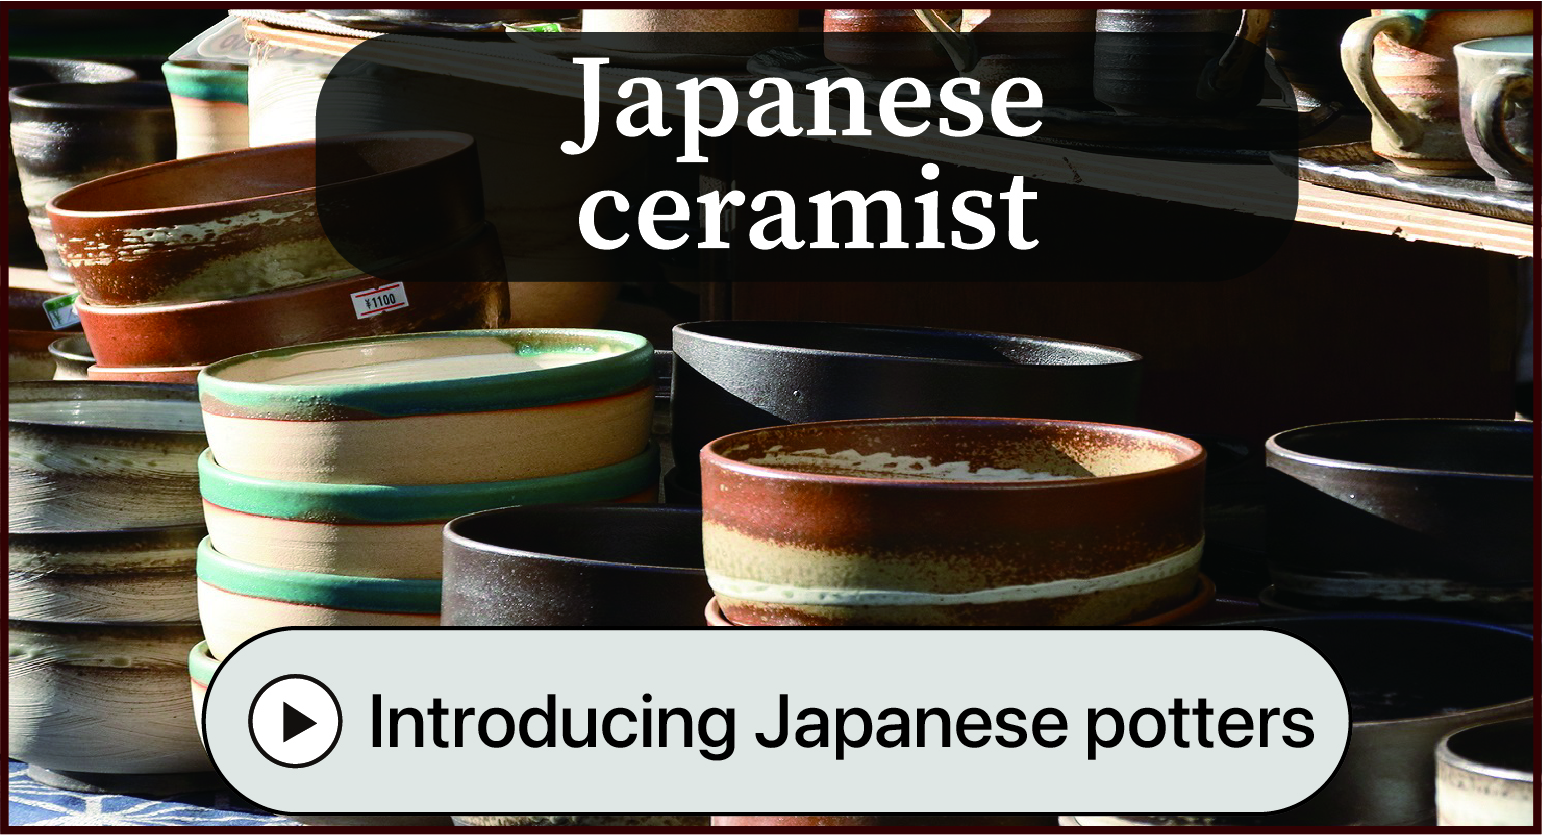 Introducing Japanese potters